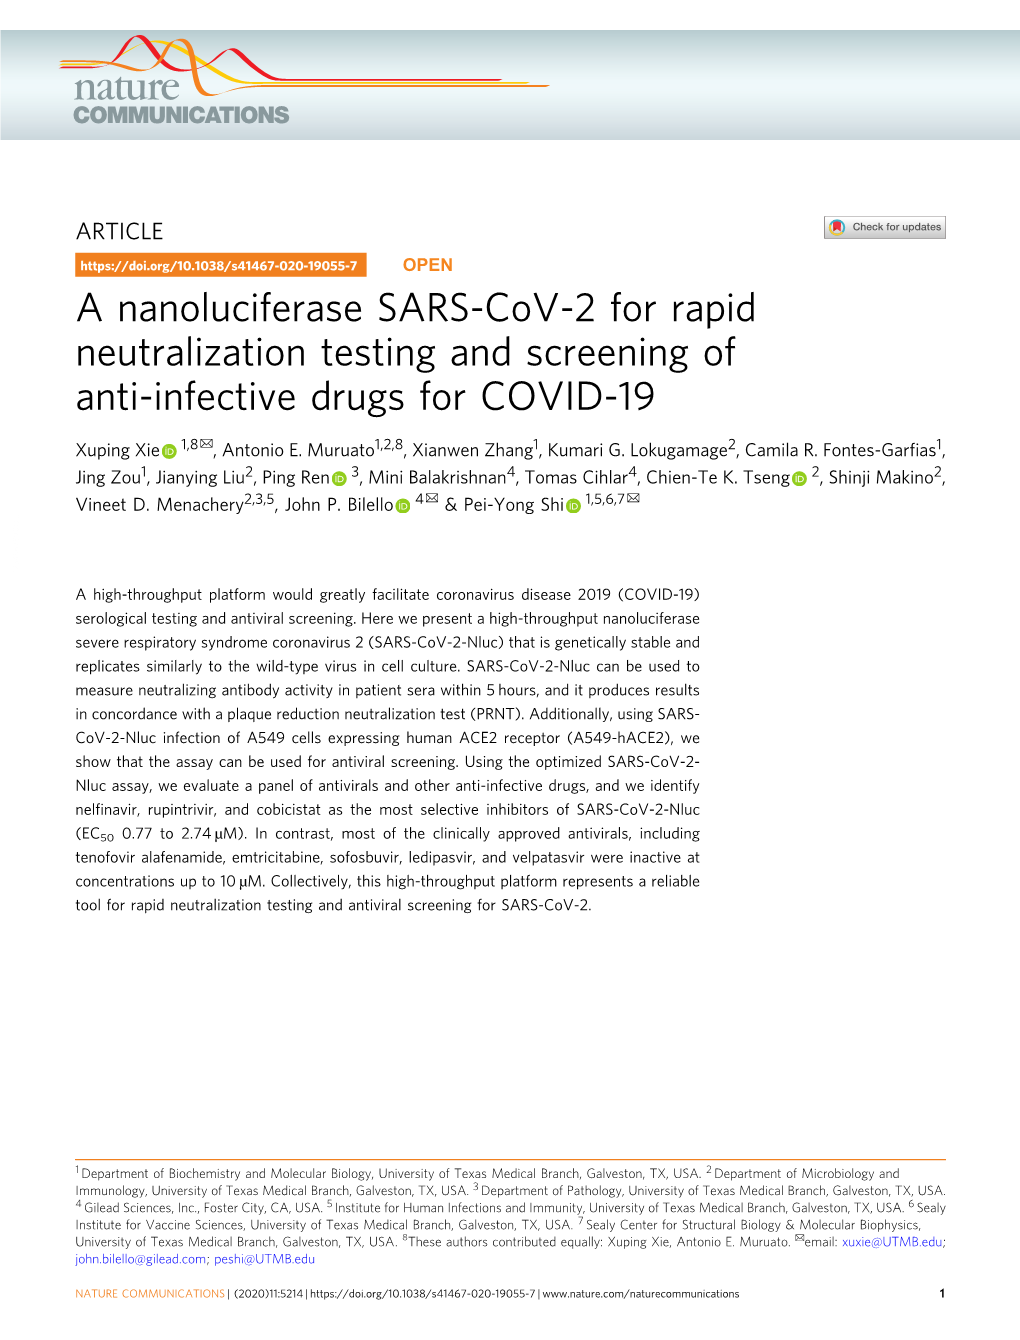 A Nanoluciferase SARS-Cov-2 for Rapid Neutralization Testing and Screening of Anti-Infective Drugs for COVID-19 ✉ Xuping Xie 1,8 , Antonio E